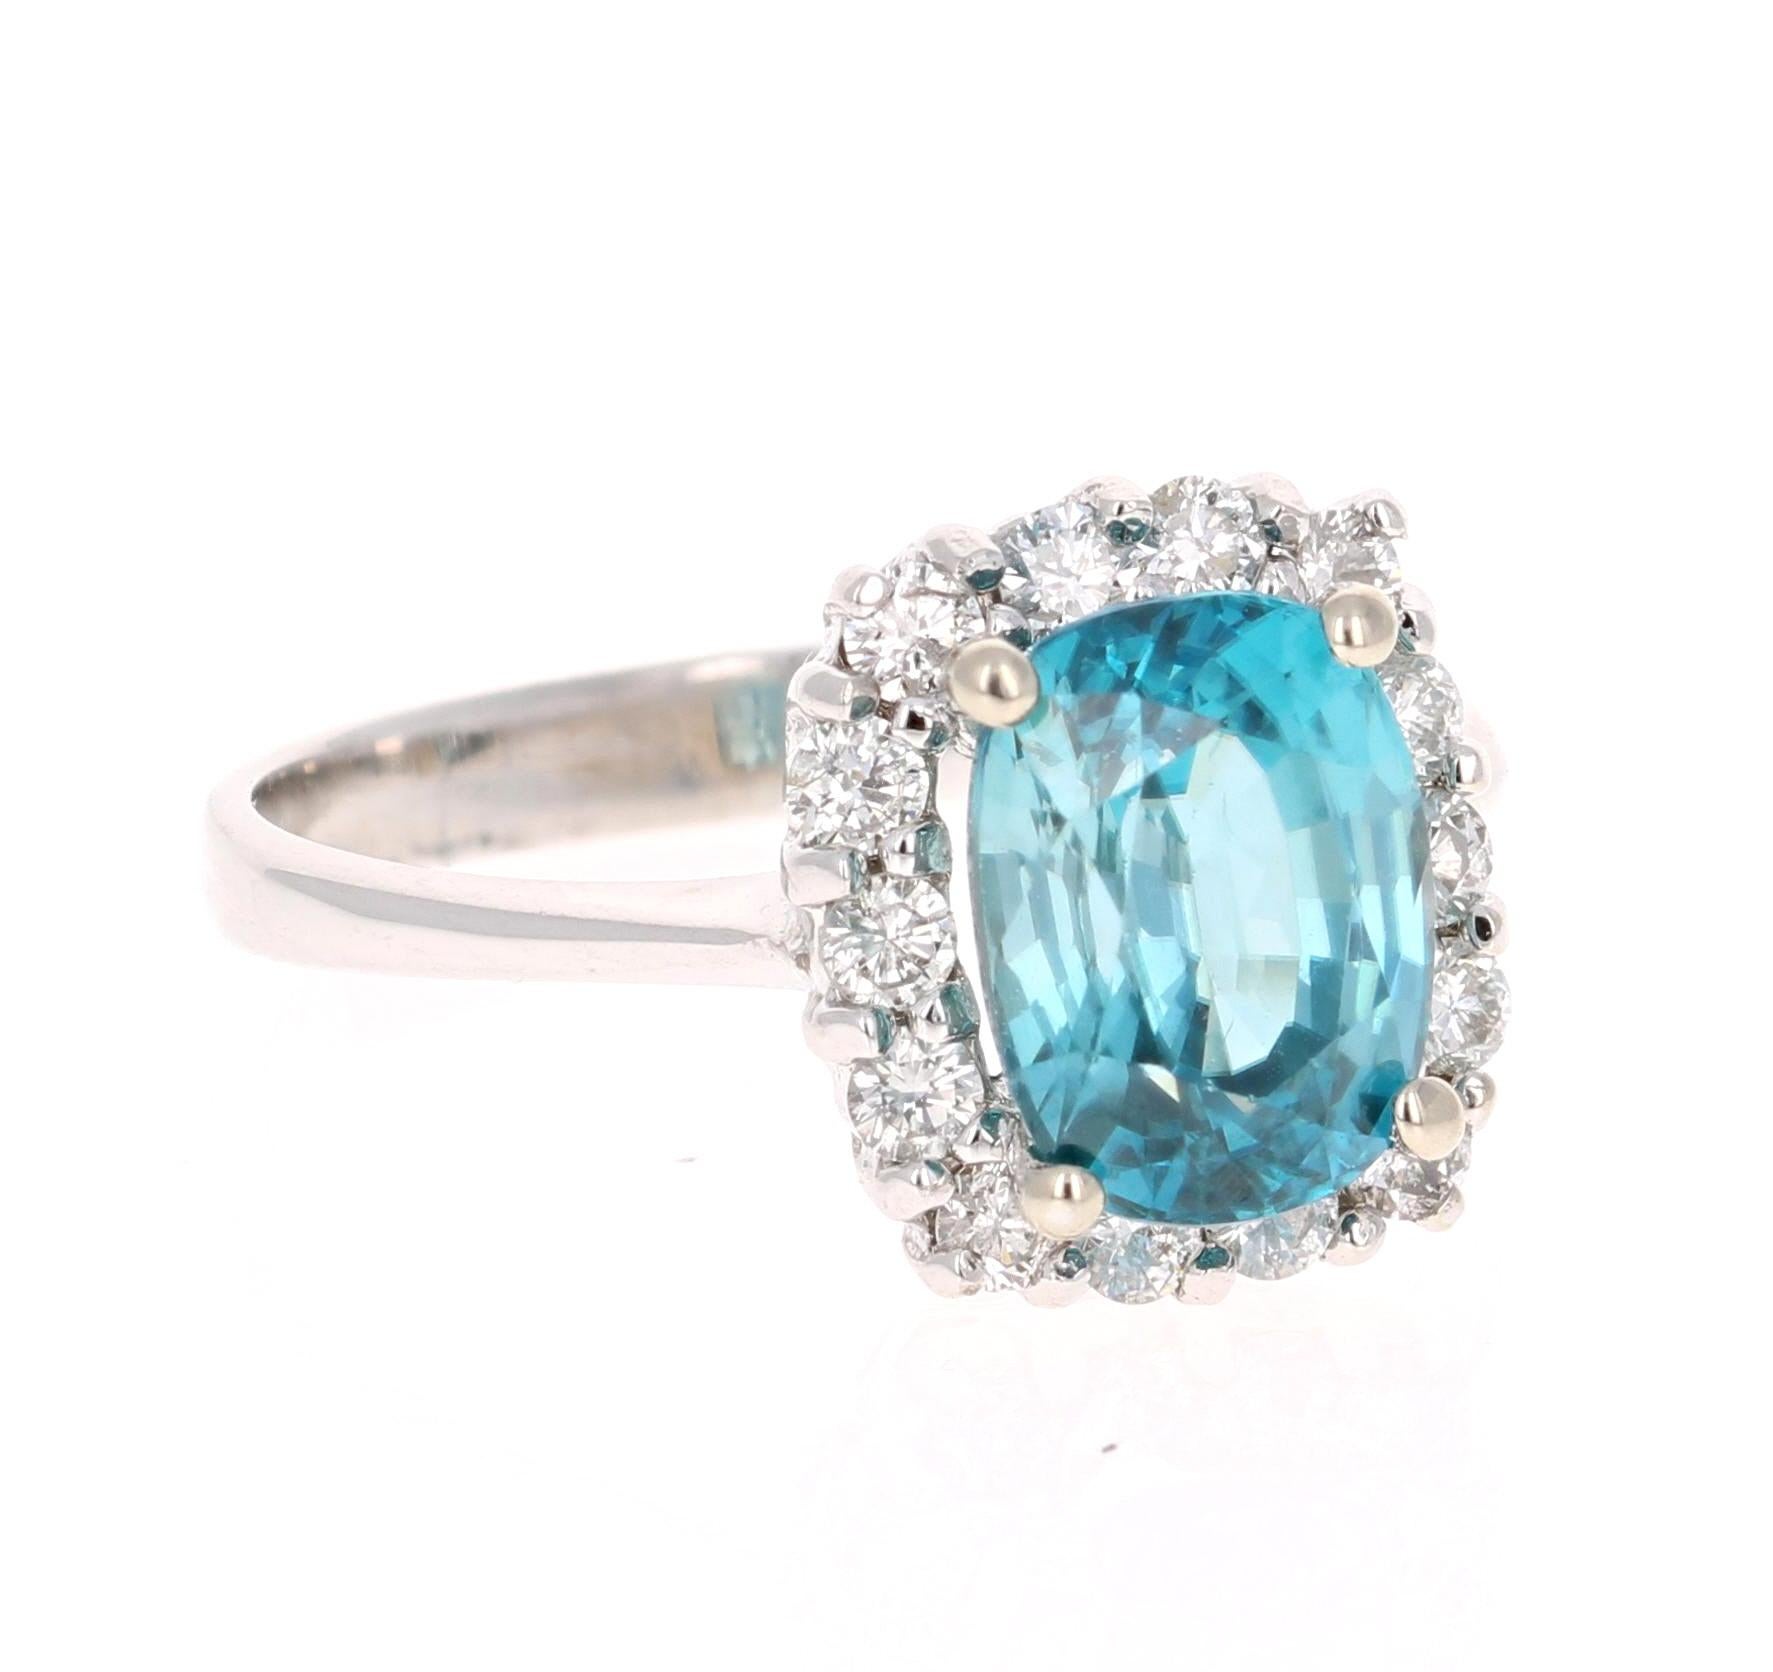 A beautiful Blue Zircon and Diamond ring that can be a nice Engagement ring or just an everyday ring!
Blue Zircon is a natural stone mined mainly in Sri Lanka, Myanmar, and Australia.  
This ring has a Oval Cut Blue Zircon that weighs 3.51 carats